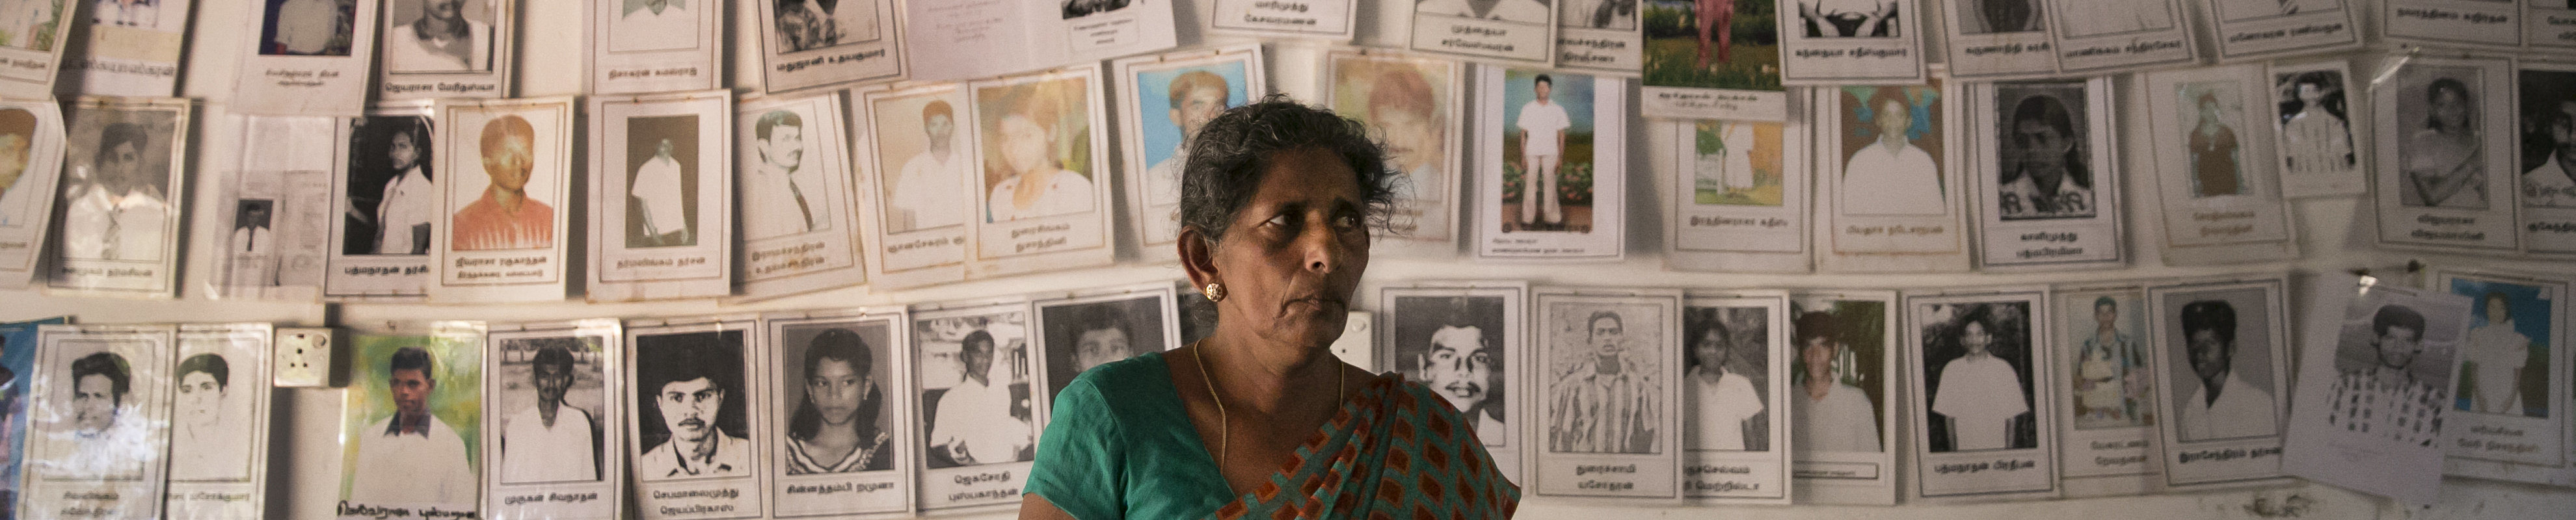 Patmanathan Kokilavani holds photos of her two children at a protest site for loved ones of the disappeared on May 13, 2019 in Mullaitivu, Sri Lanka. Behind her are numerous photos strung on a wall of others who are disappeared.